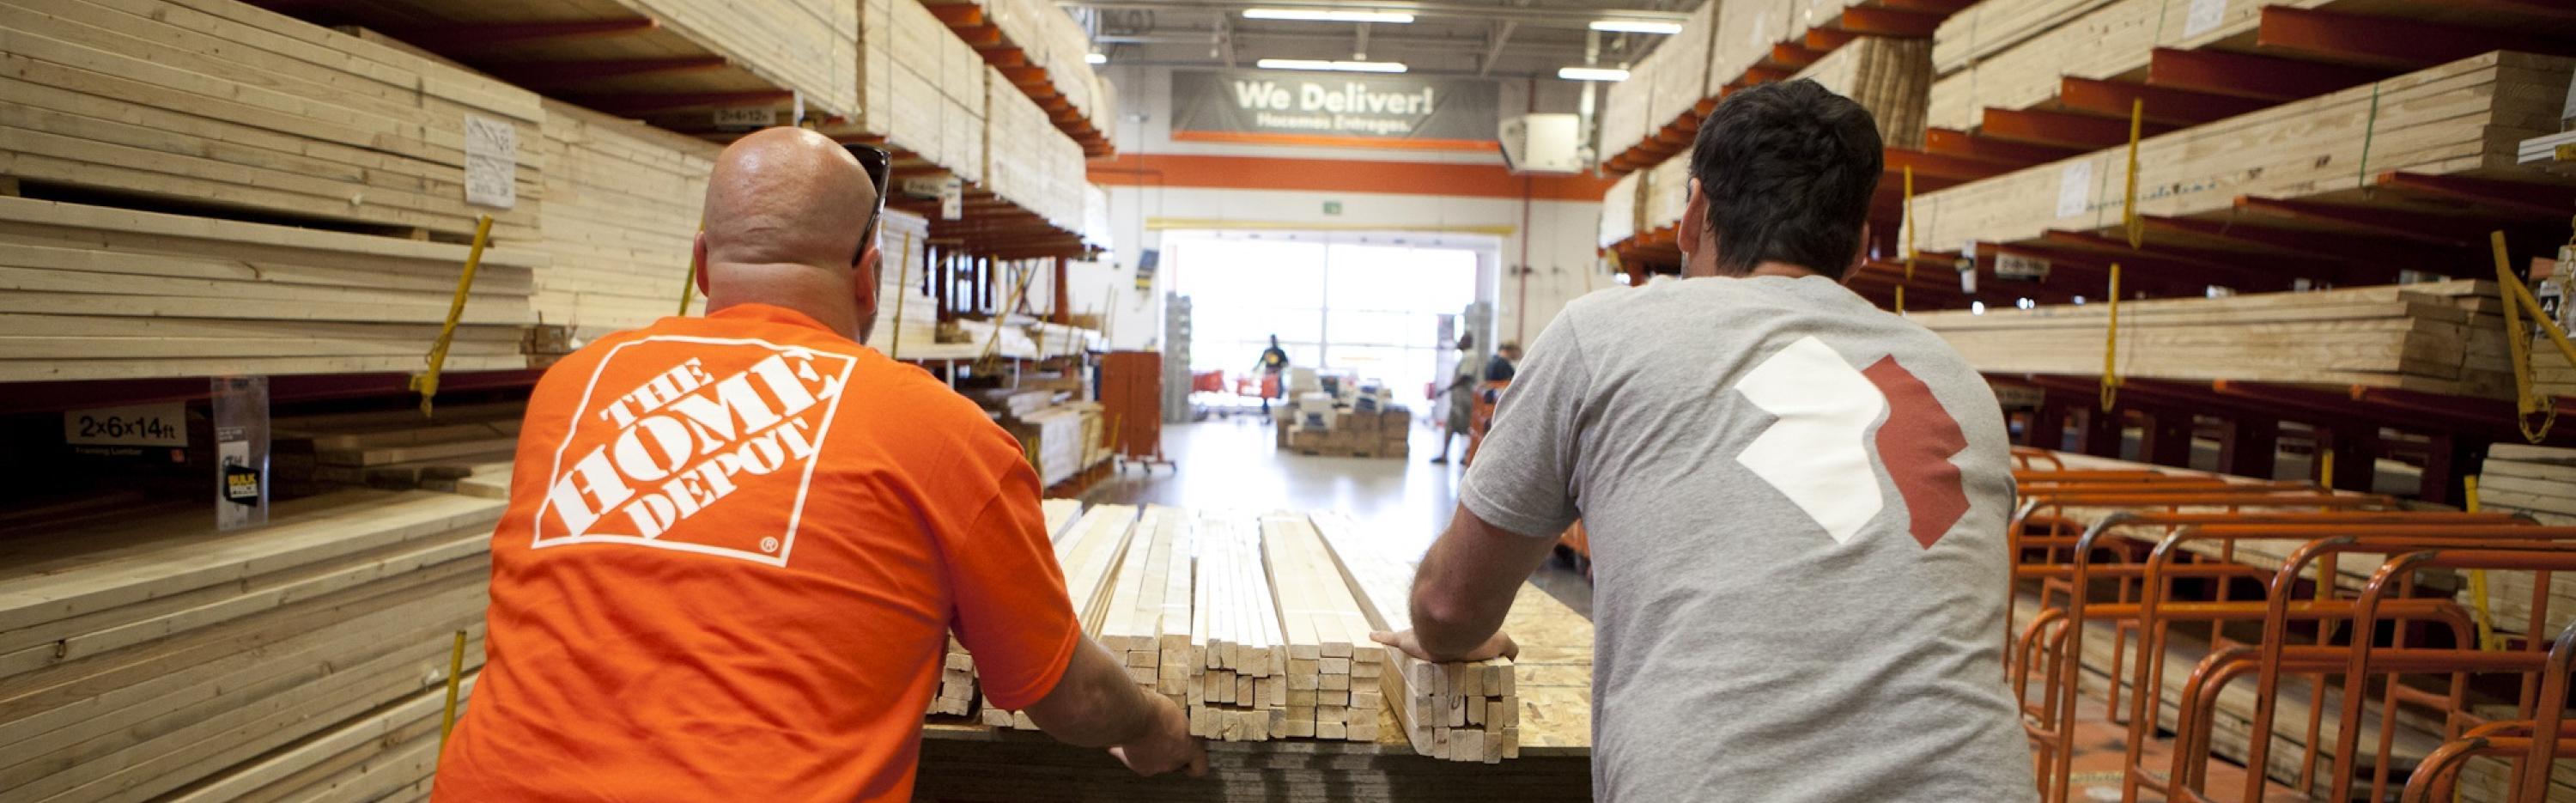 Team Depot and Team Rubicon gather supplies in a Home Depot store